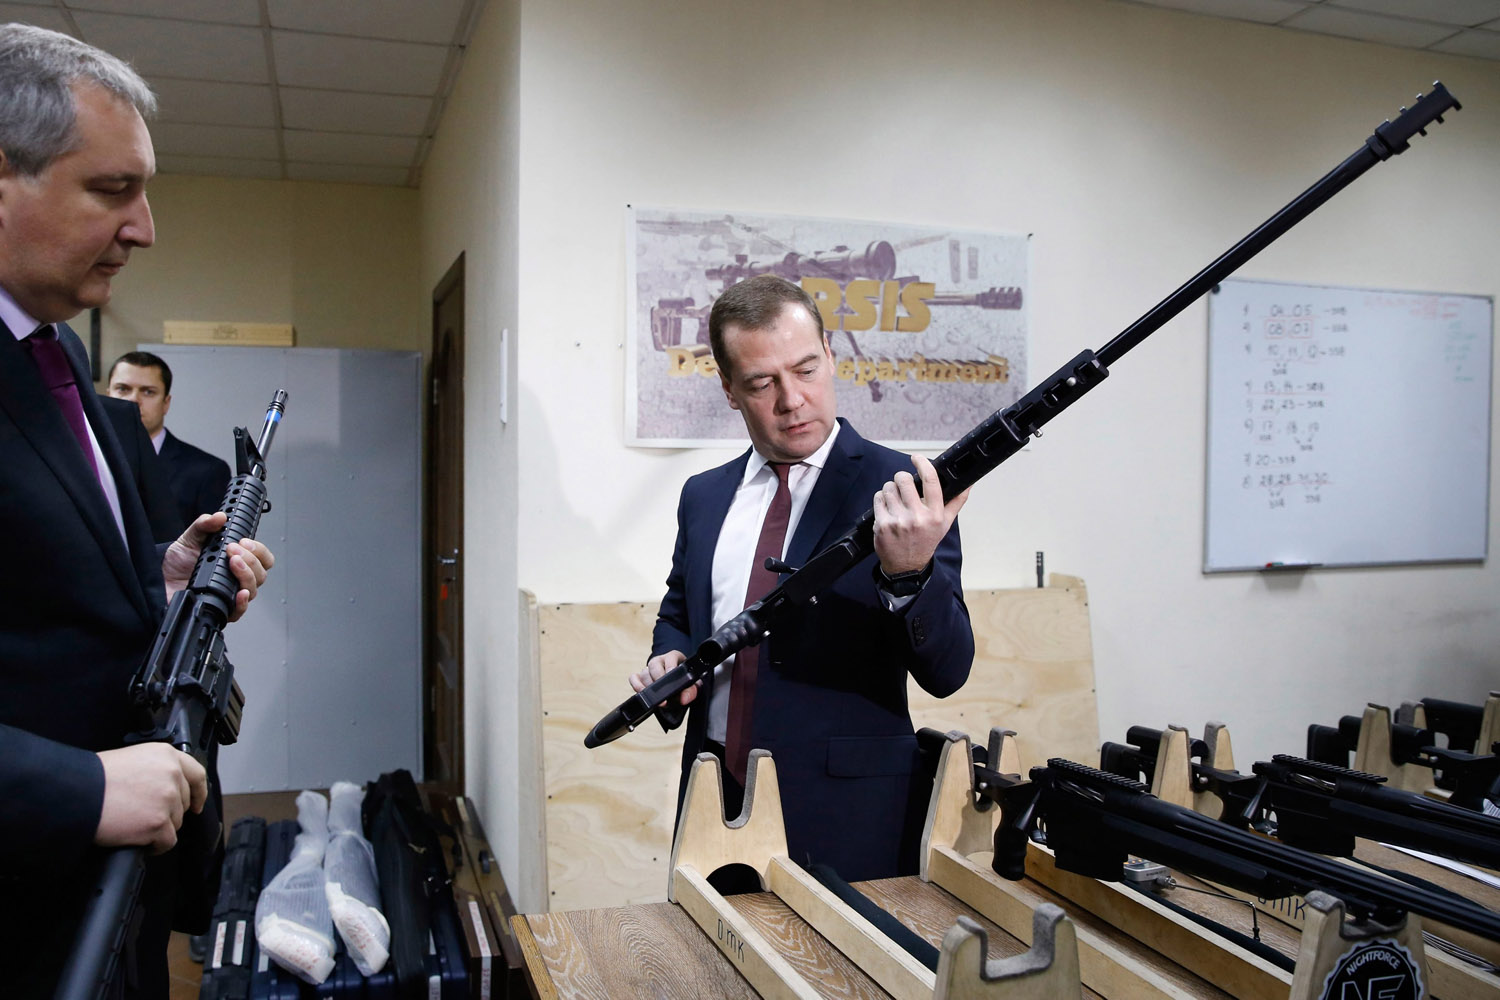 Nov. 19, 2013. Russian Prime Minister Dmitry Medvedev (R) inspects an unspecified model of Russian weapons manufacturer ORSIS as Russian Deputy Prime Minister Dmitry Rogozin (L) looks on during his visit to the Promtechnologies Group in Moscow.